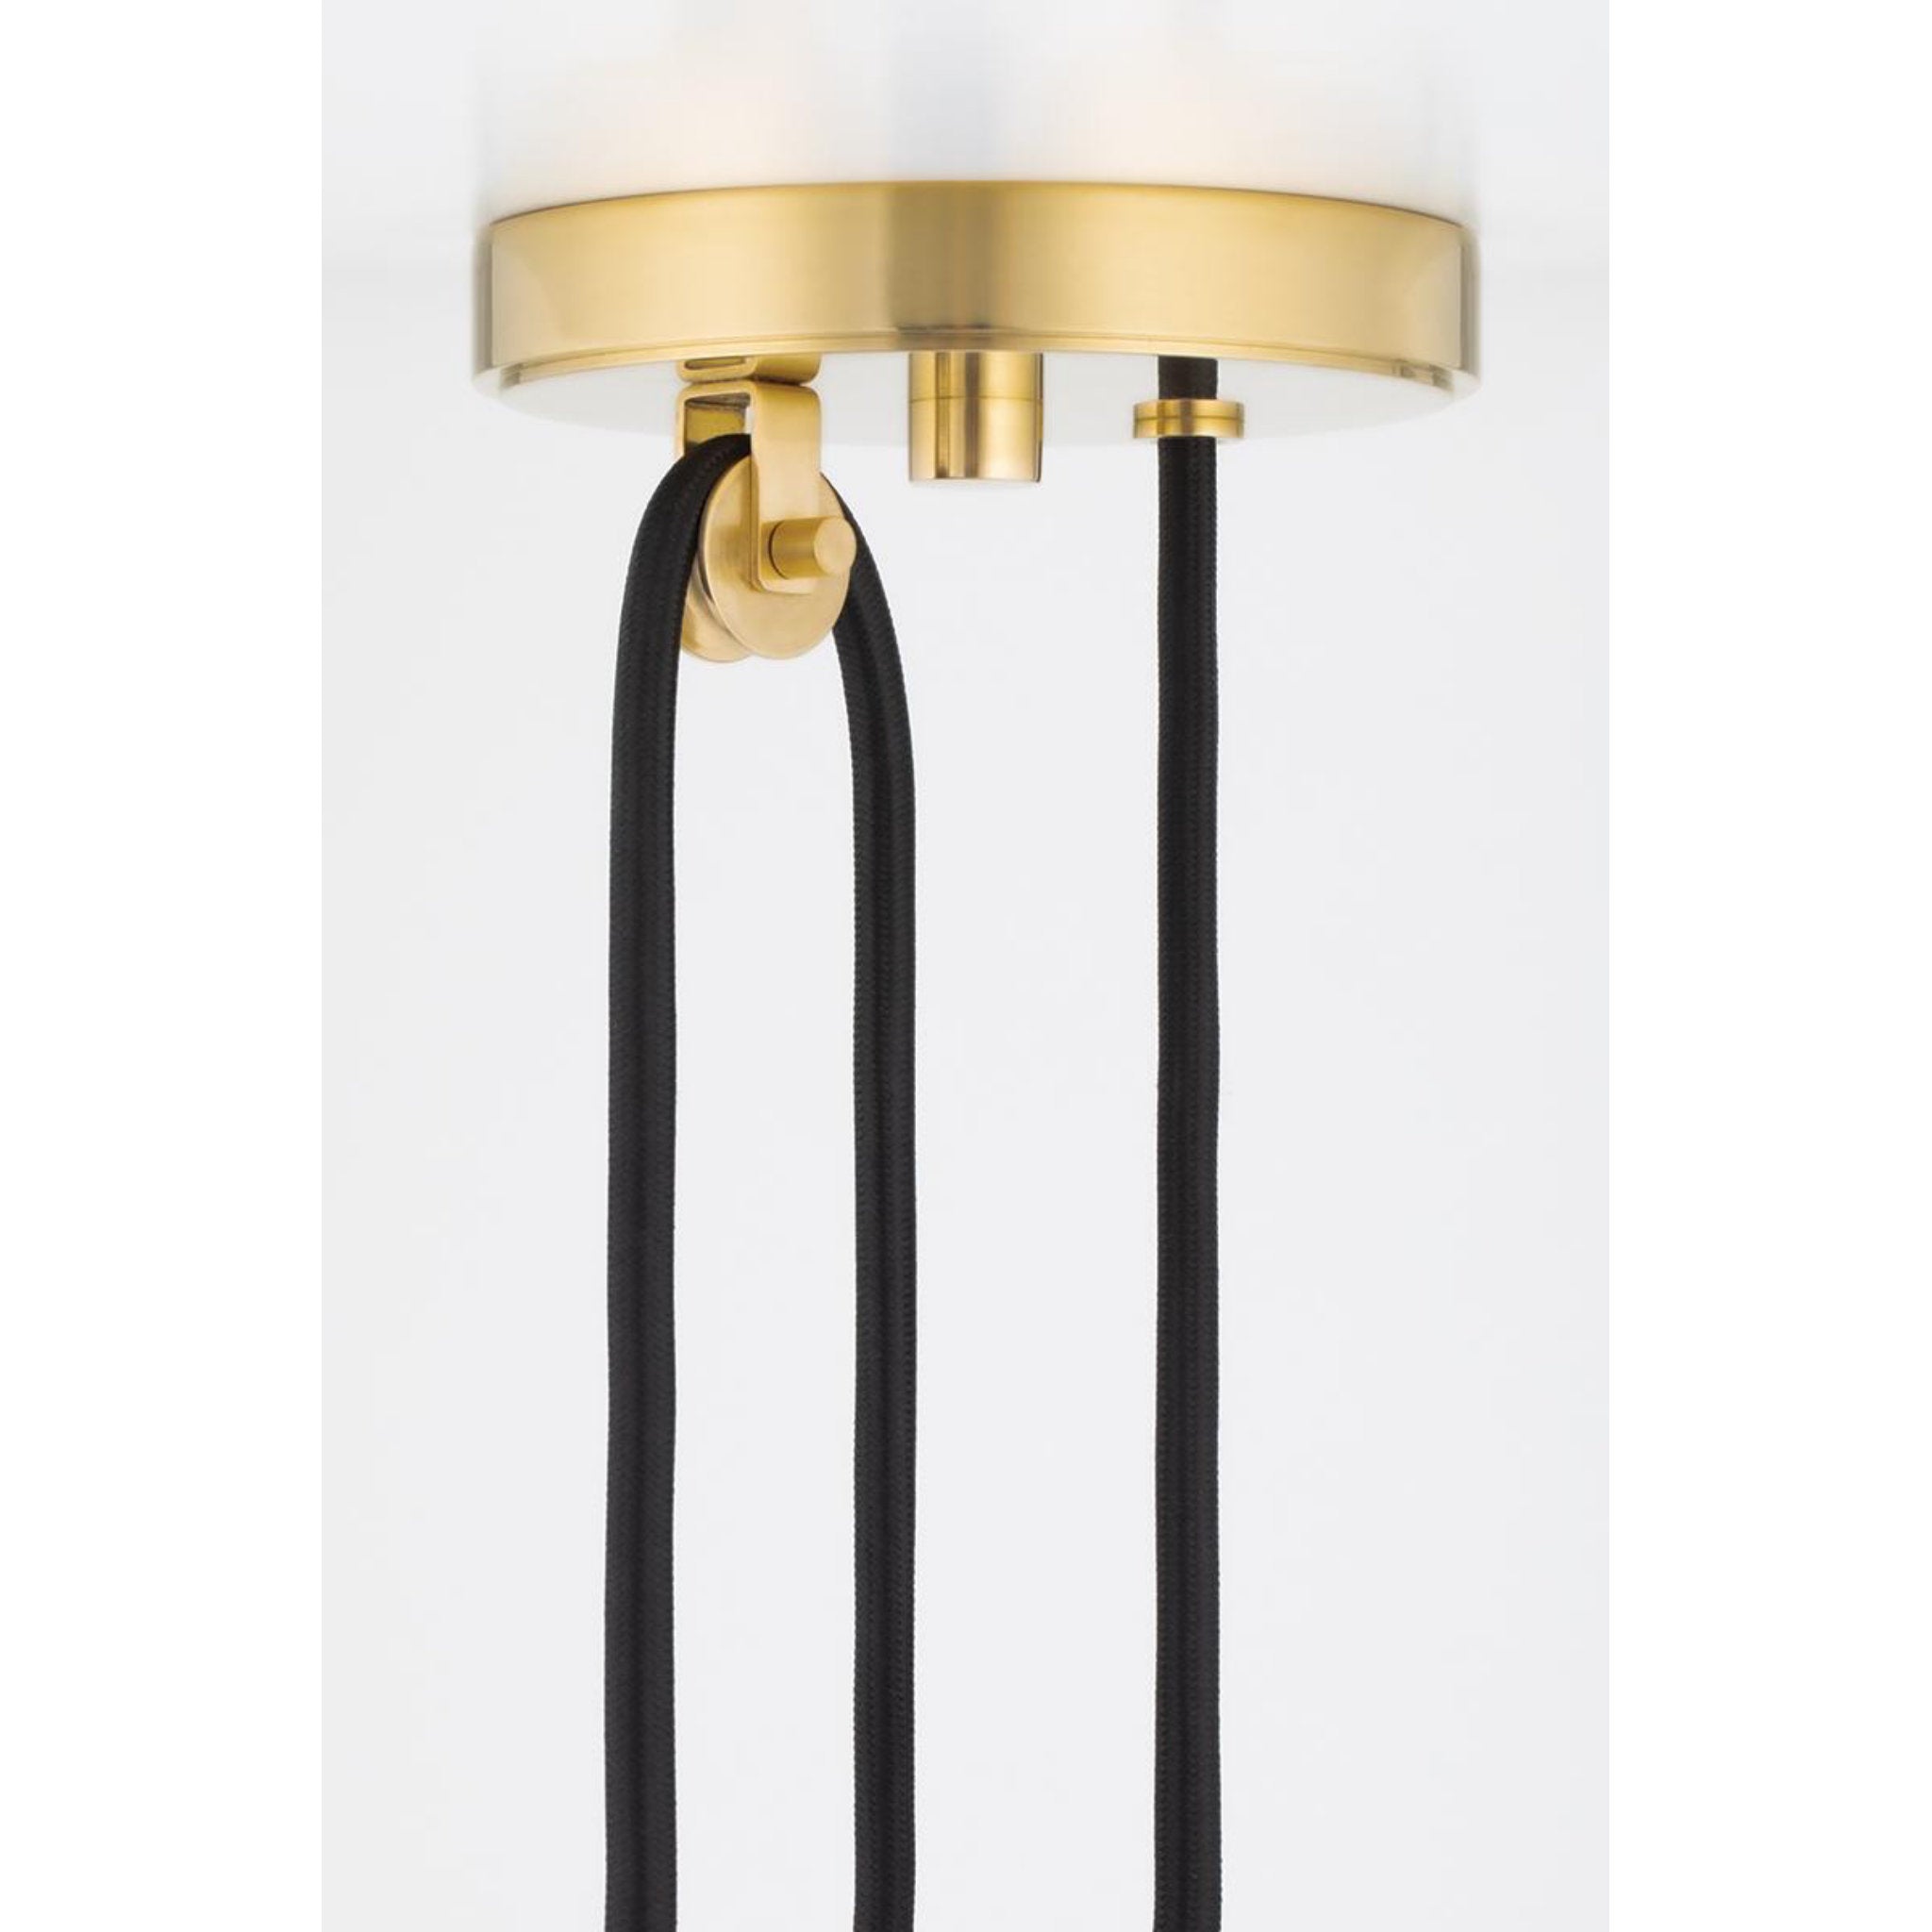 Dorset 1 Light Table Lamp in Aged Brass by Mark D. Sikes